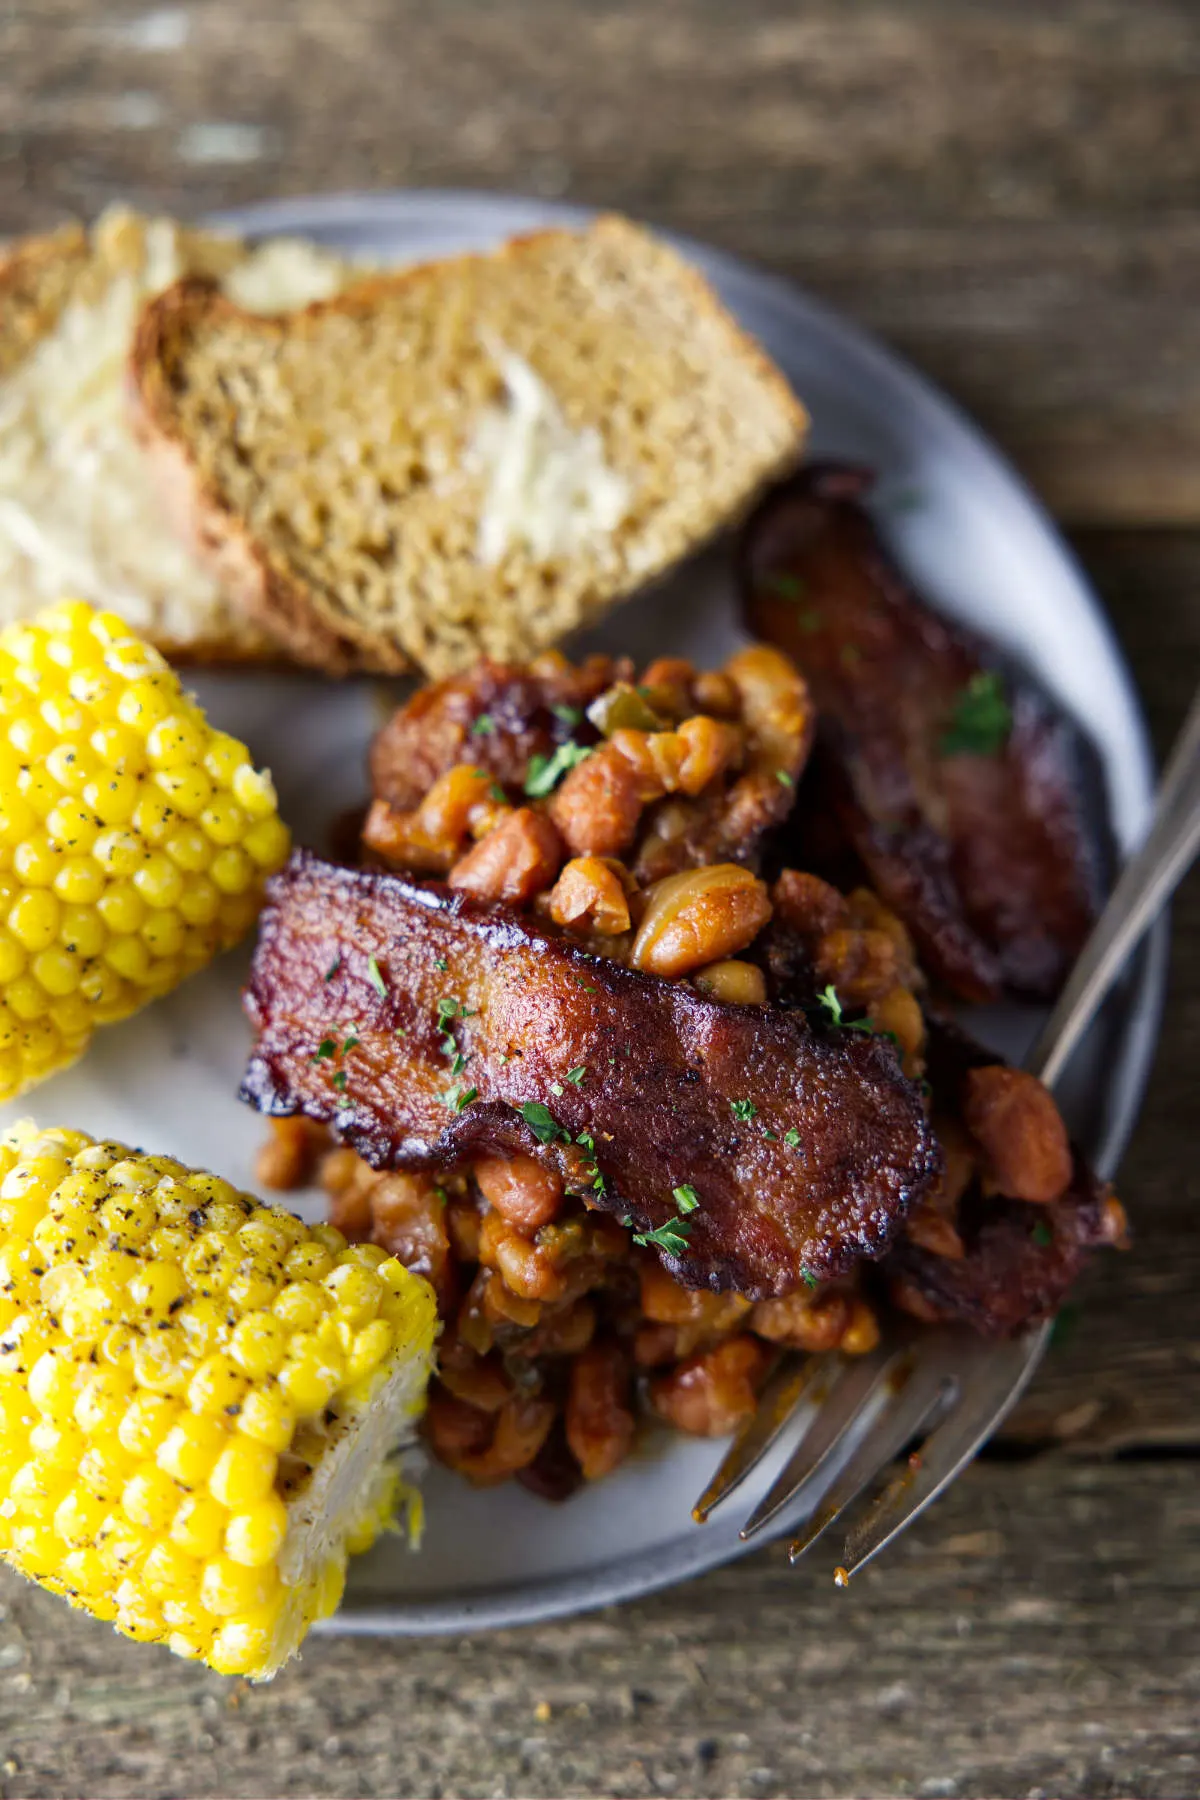 baked beans on a plate with corn and bread